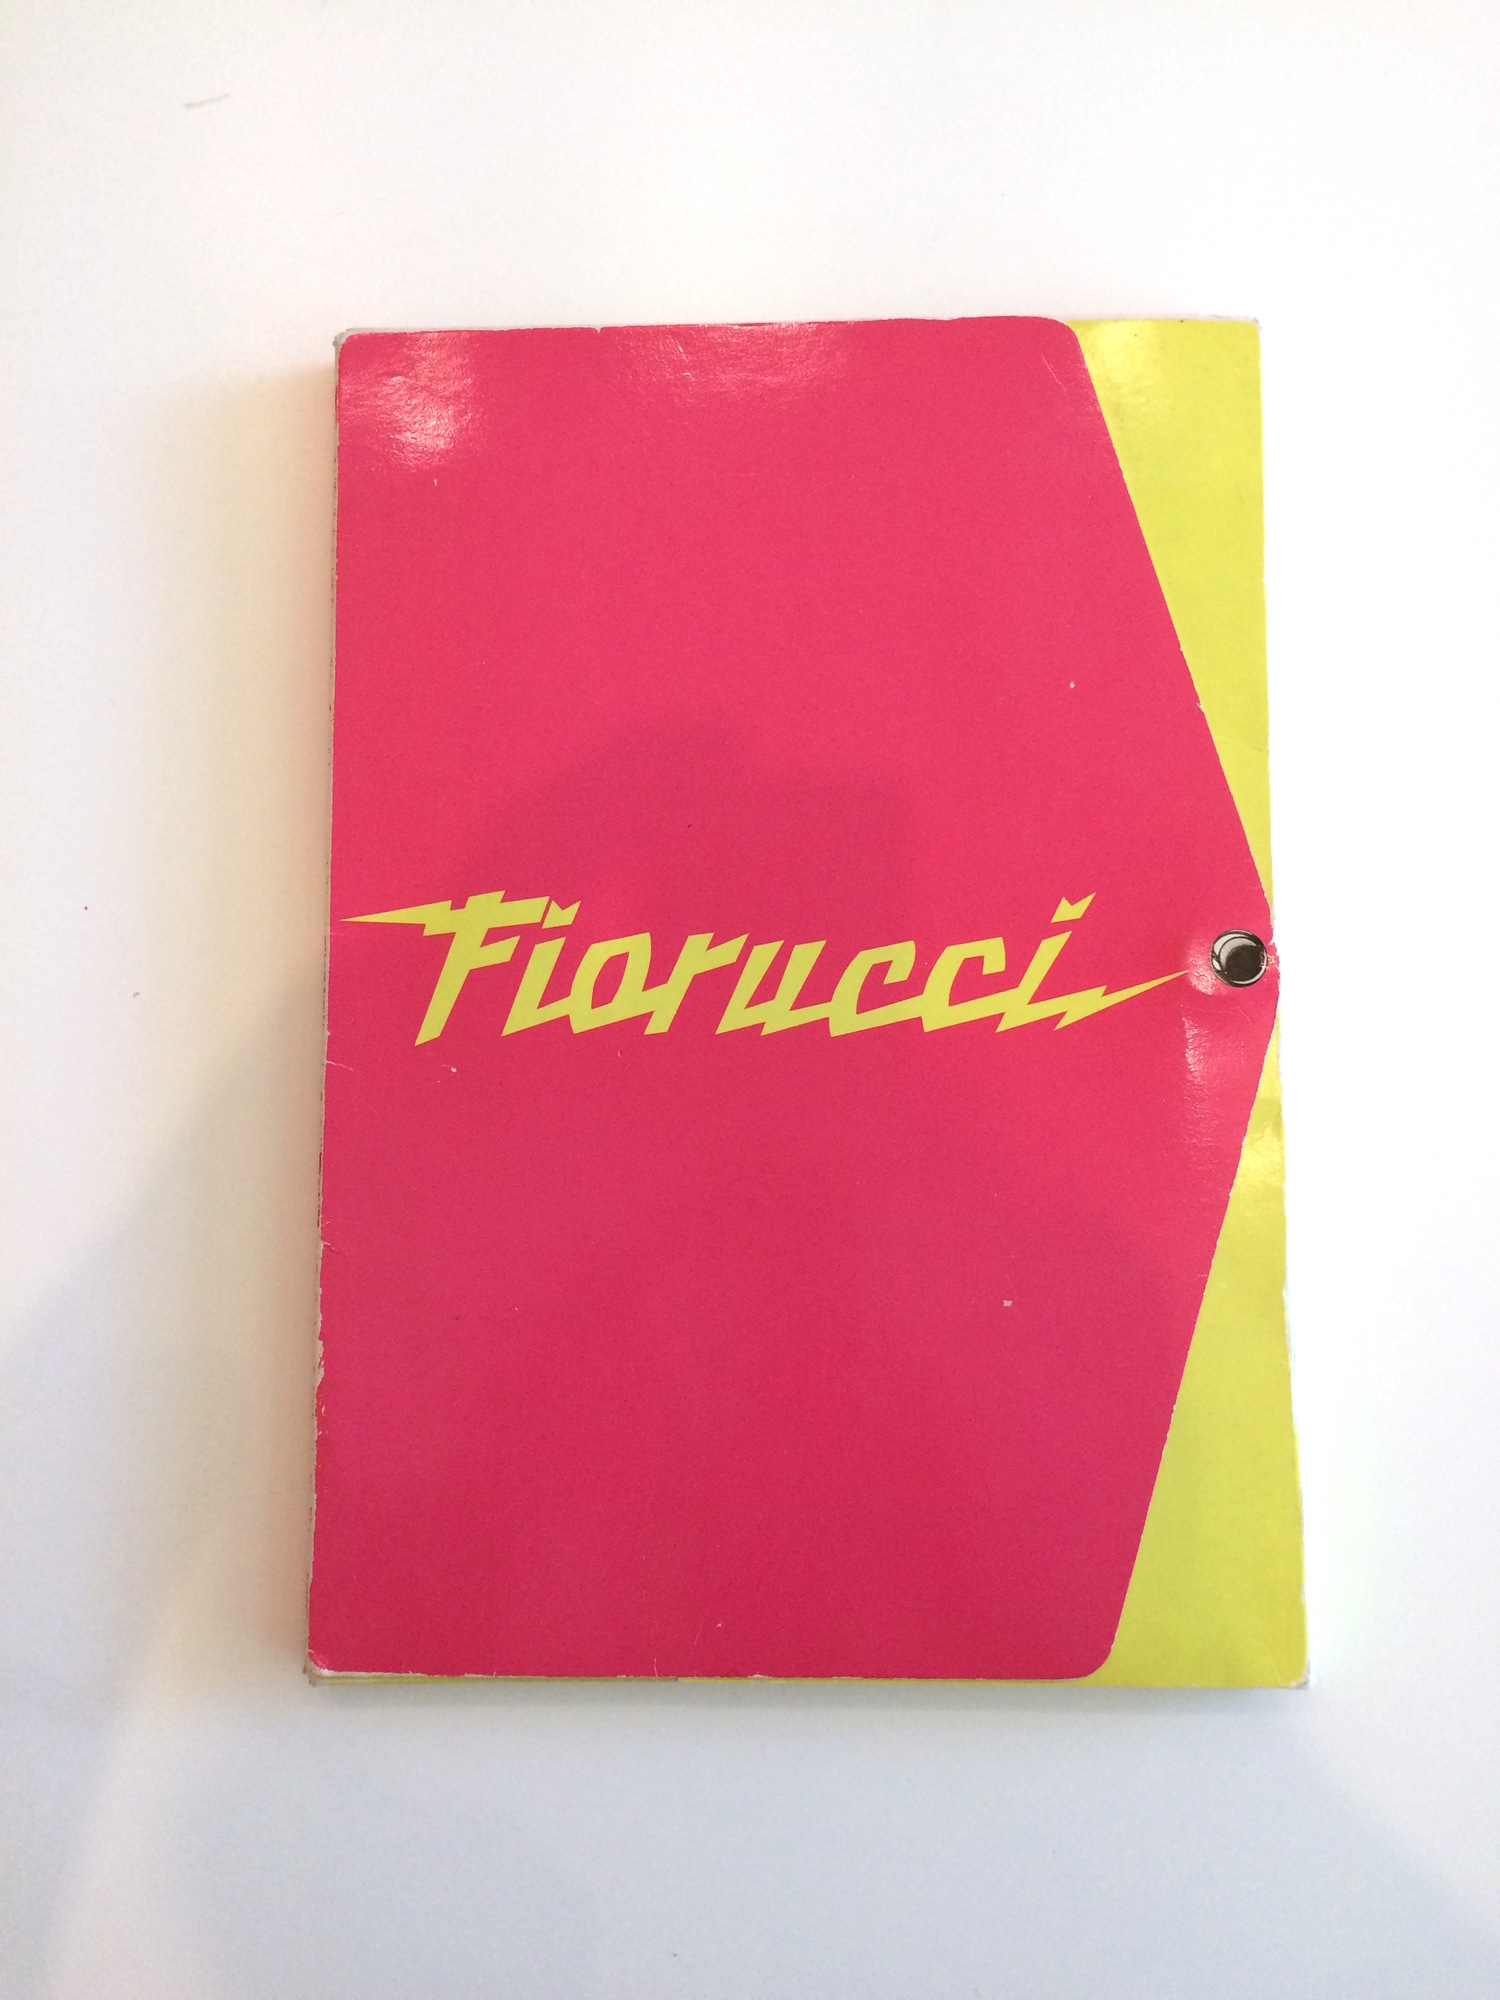 FIORUCCI Vintage collectible STICKER PANINI 1984 SERIE Pinup Lady not peeled 